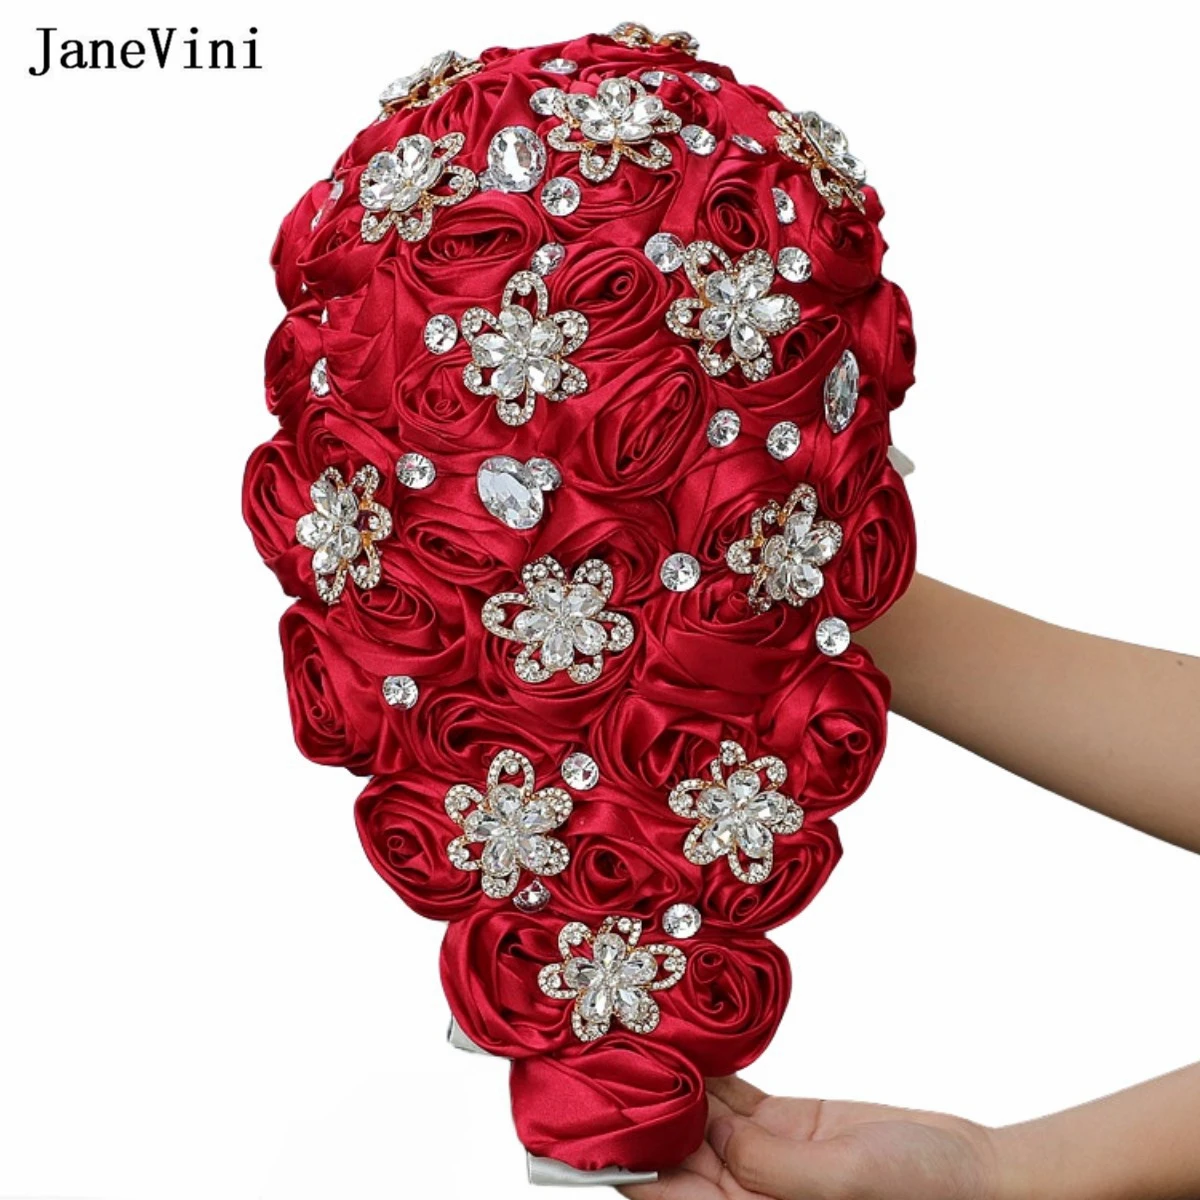 

JaneVini European Waterfall Bridal Flowers Bouquets Crystal Artificial Burgundy Satin Roses Cascading Wedding Bouquet for Bride